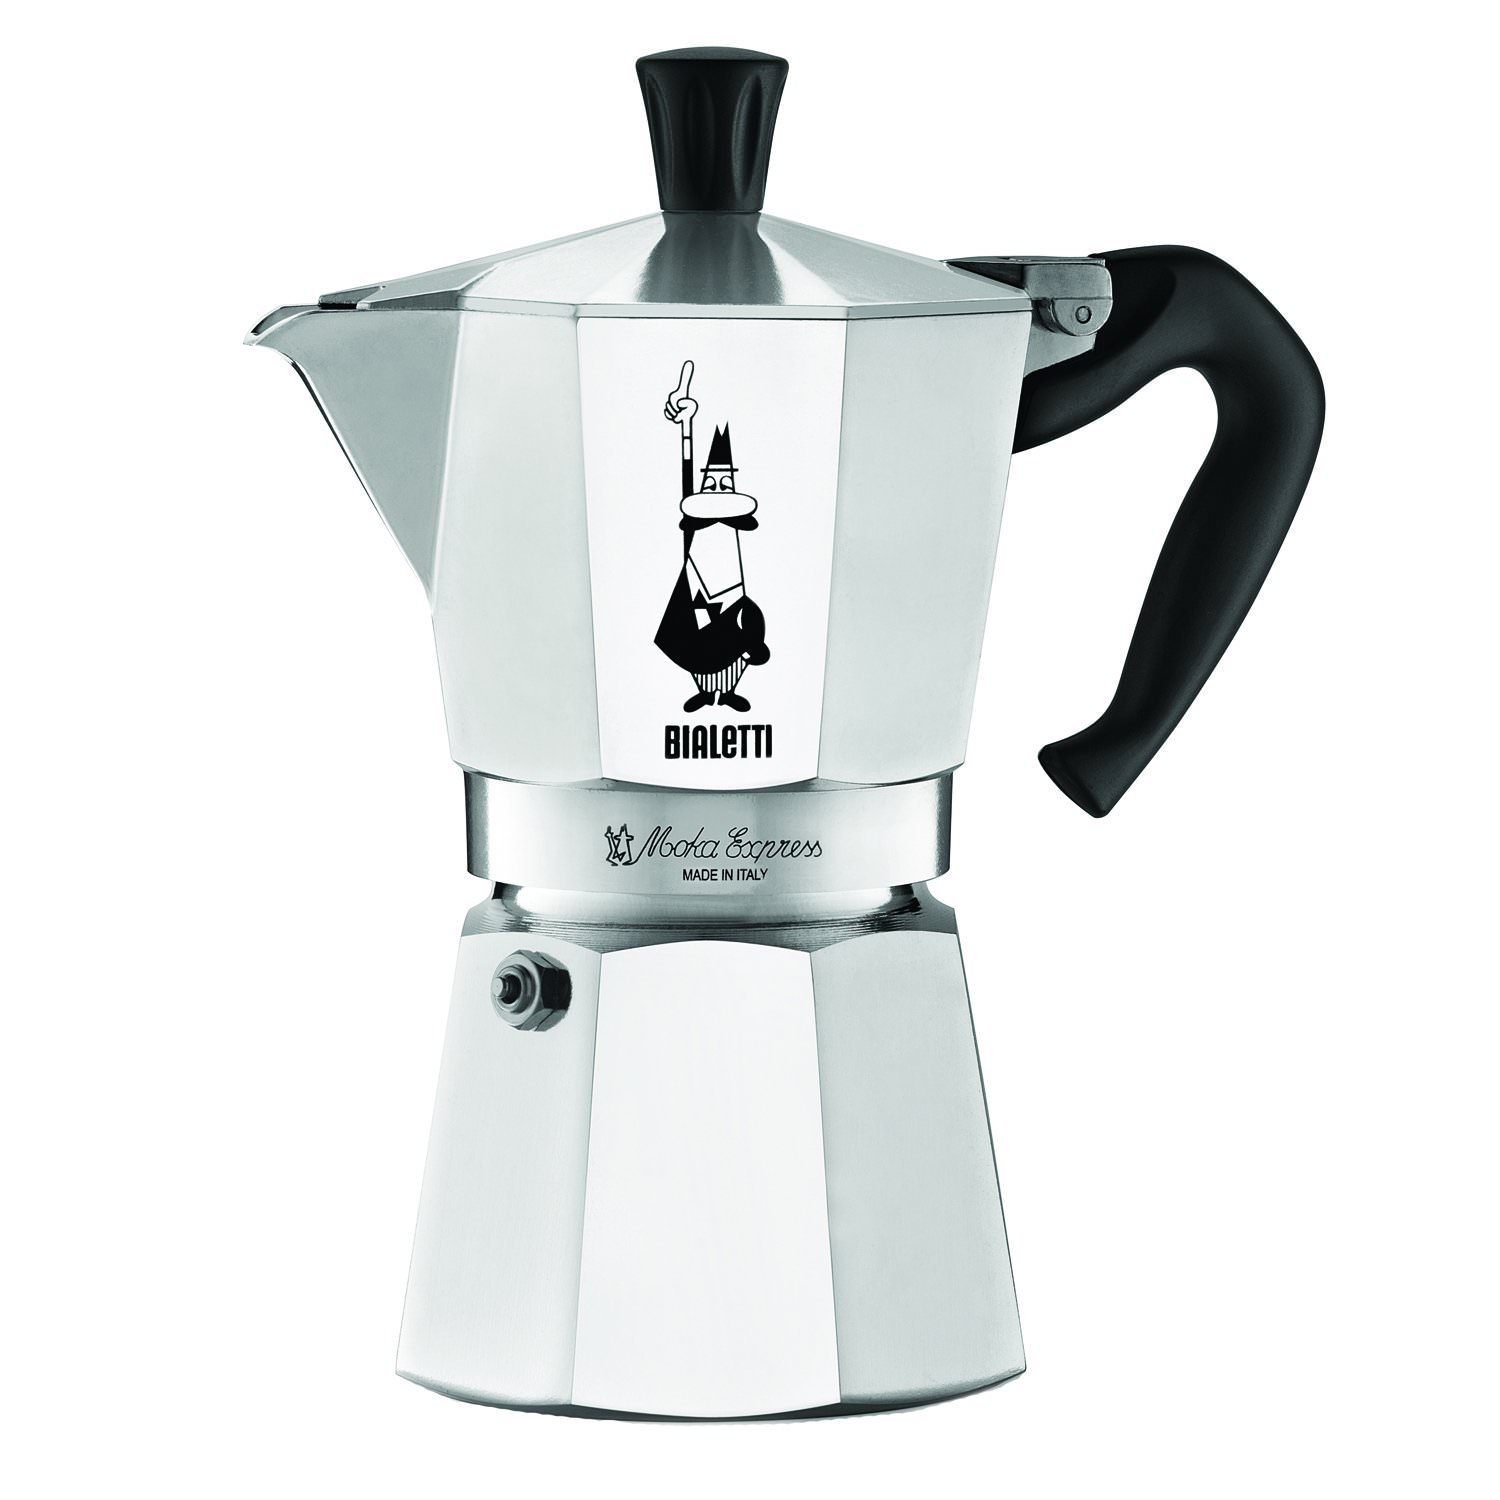 Moka Pot Metal Moka Pot for Kitchen Cafe Silver Aluminum Espresso and Coffee Maker for for Gas or Electric Ceramic Stovetop 6 Cups Stovetop Espresso Machine